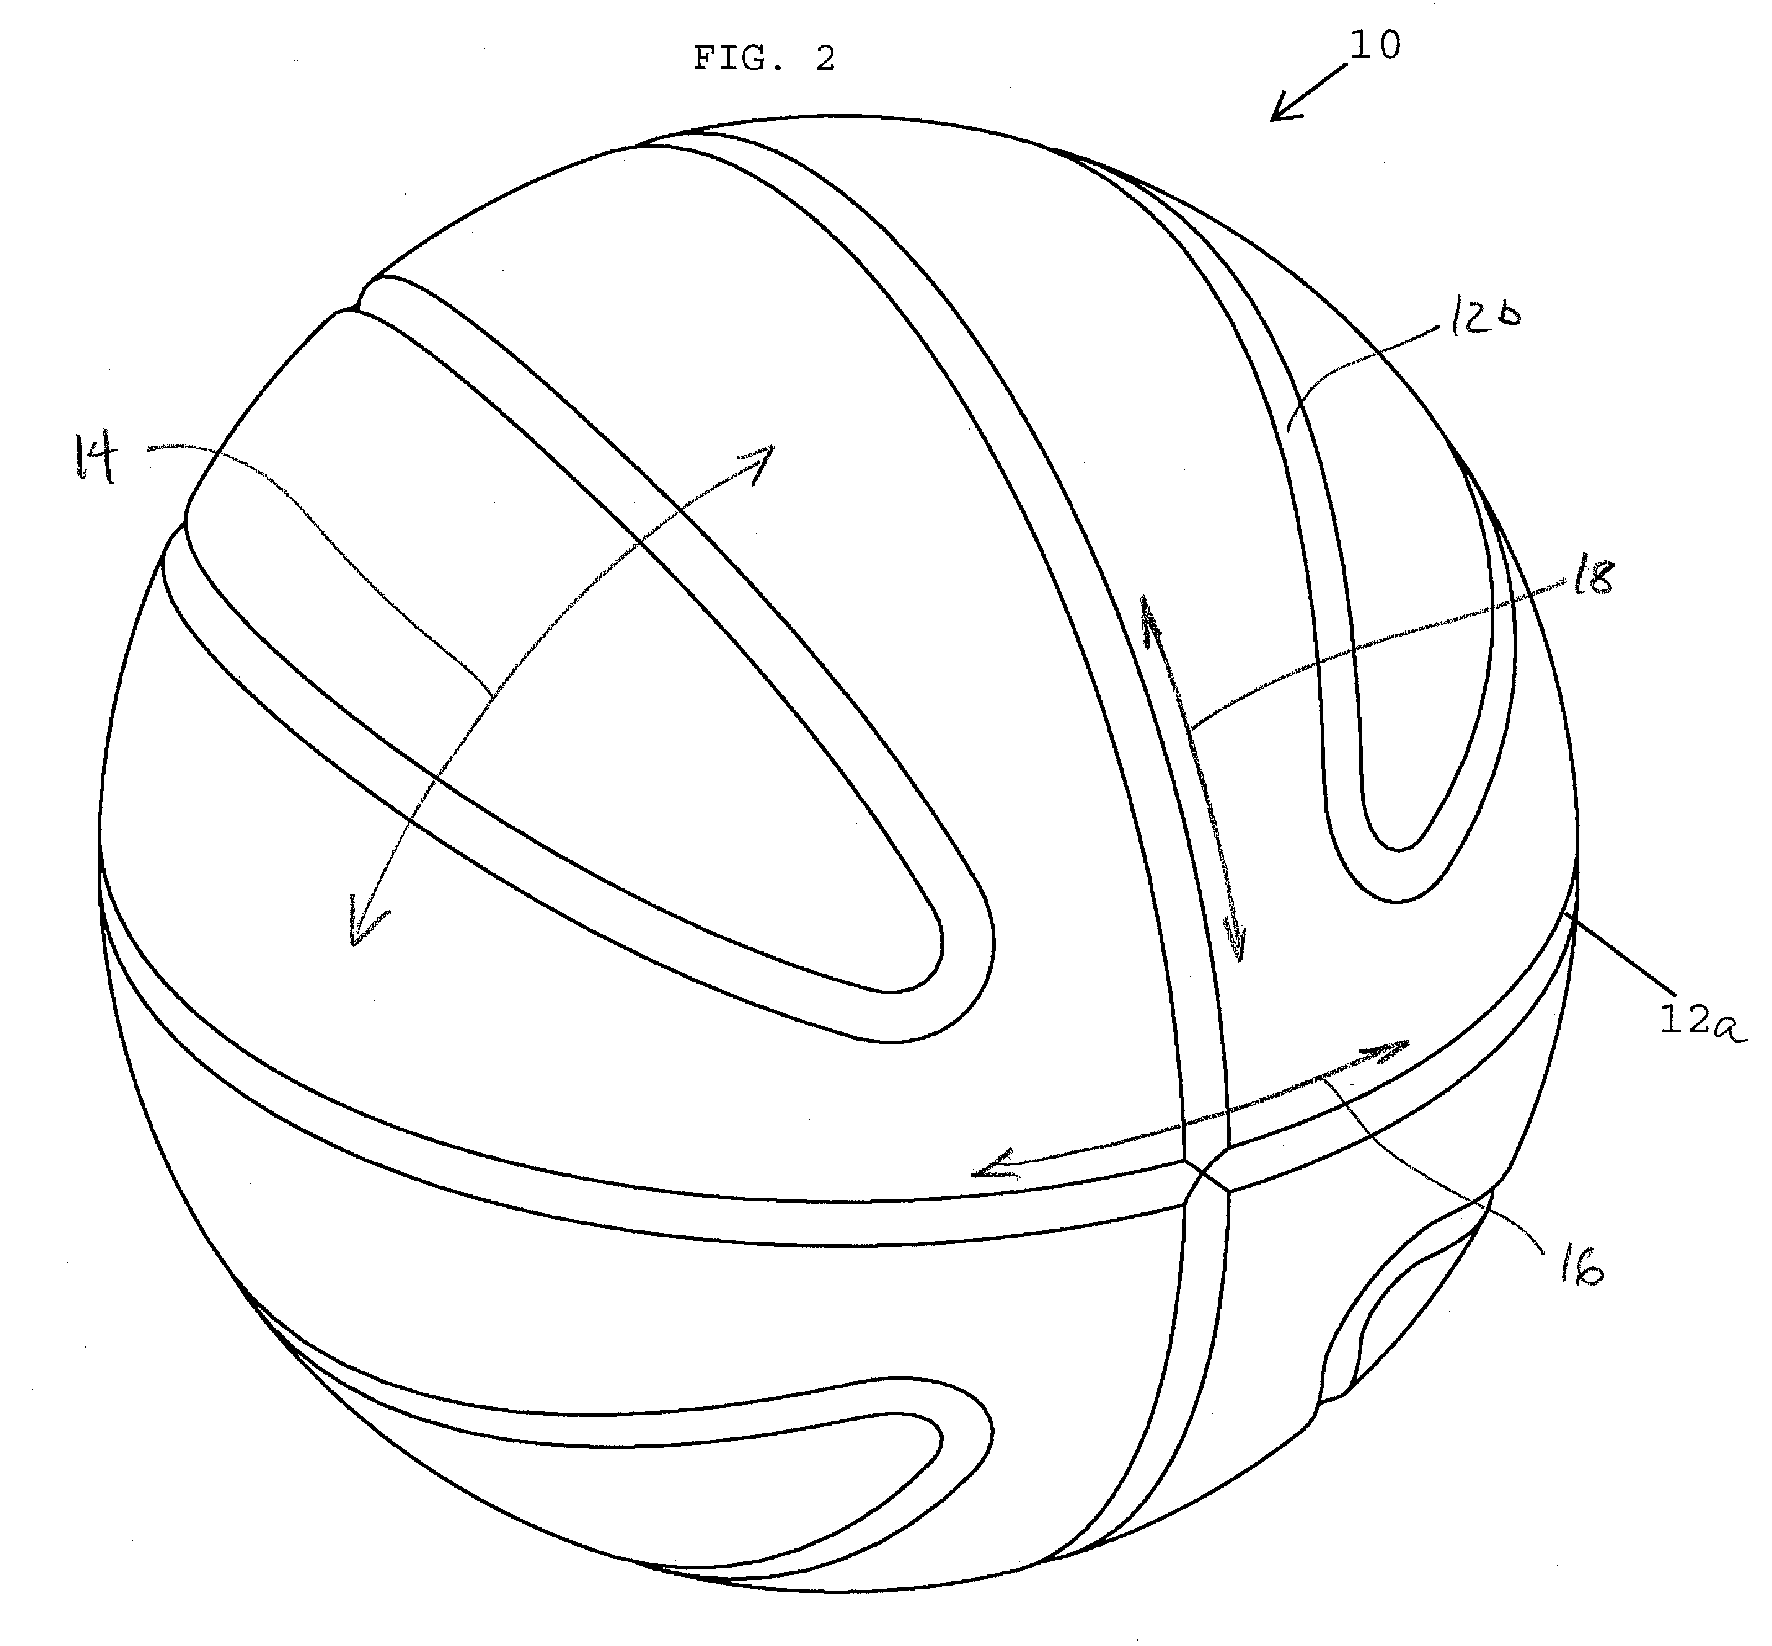 Golf ball surface patterns comprising multiple channels